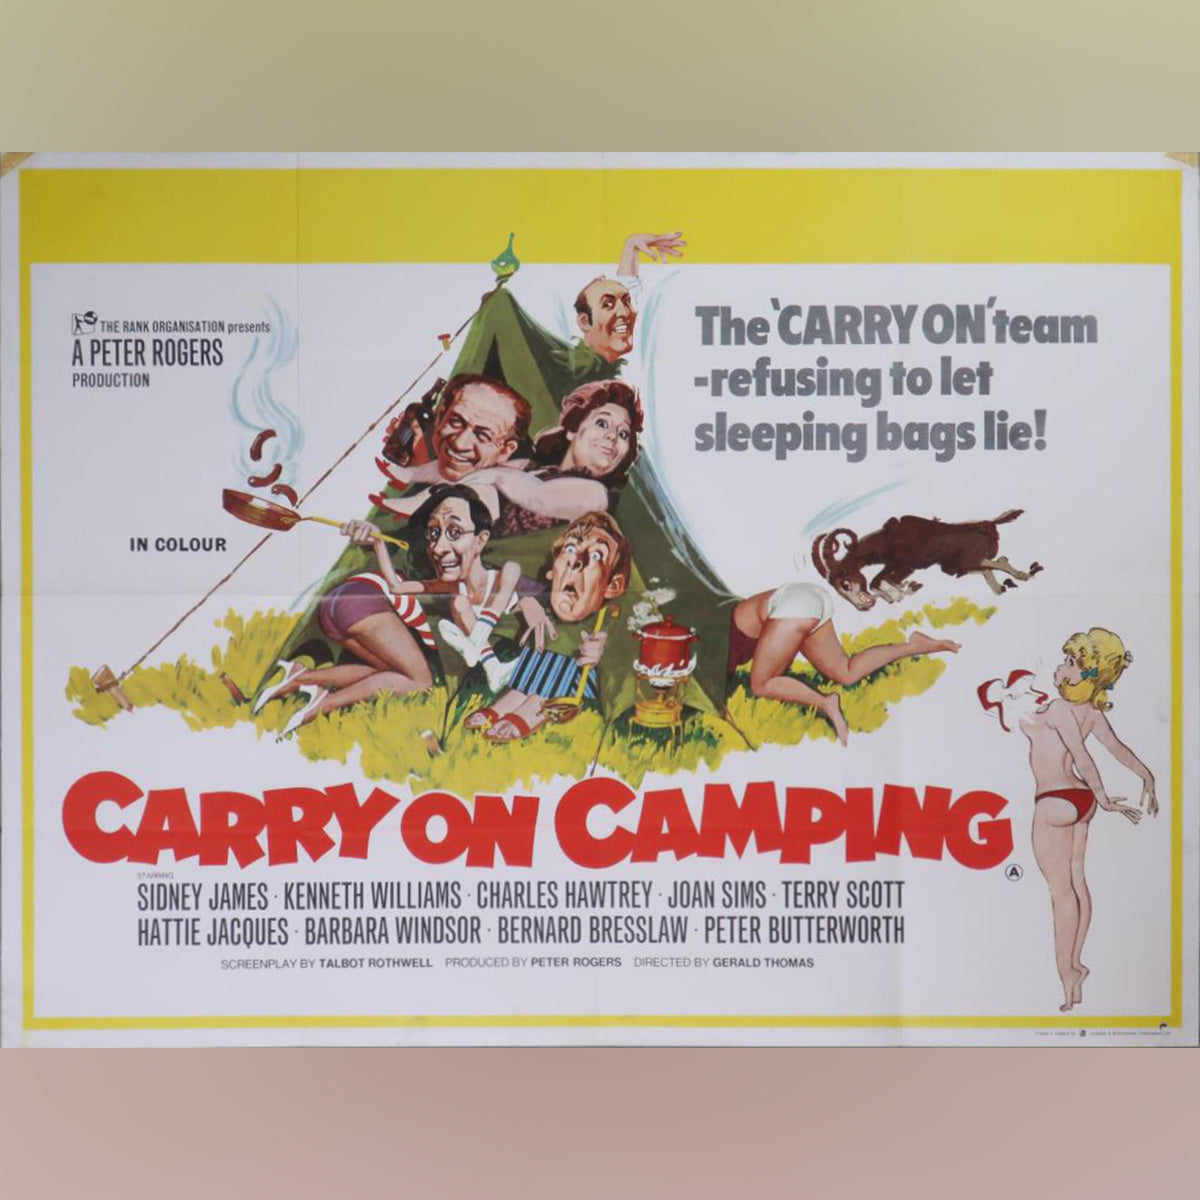 Original Movie Poster of Carry On Camping (1969)